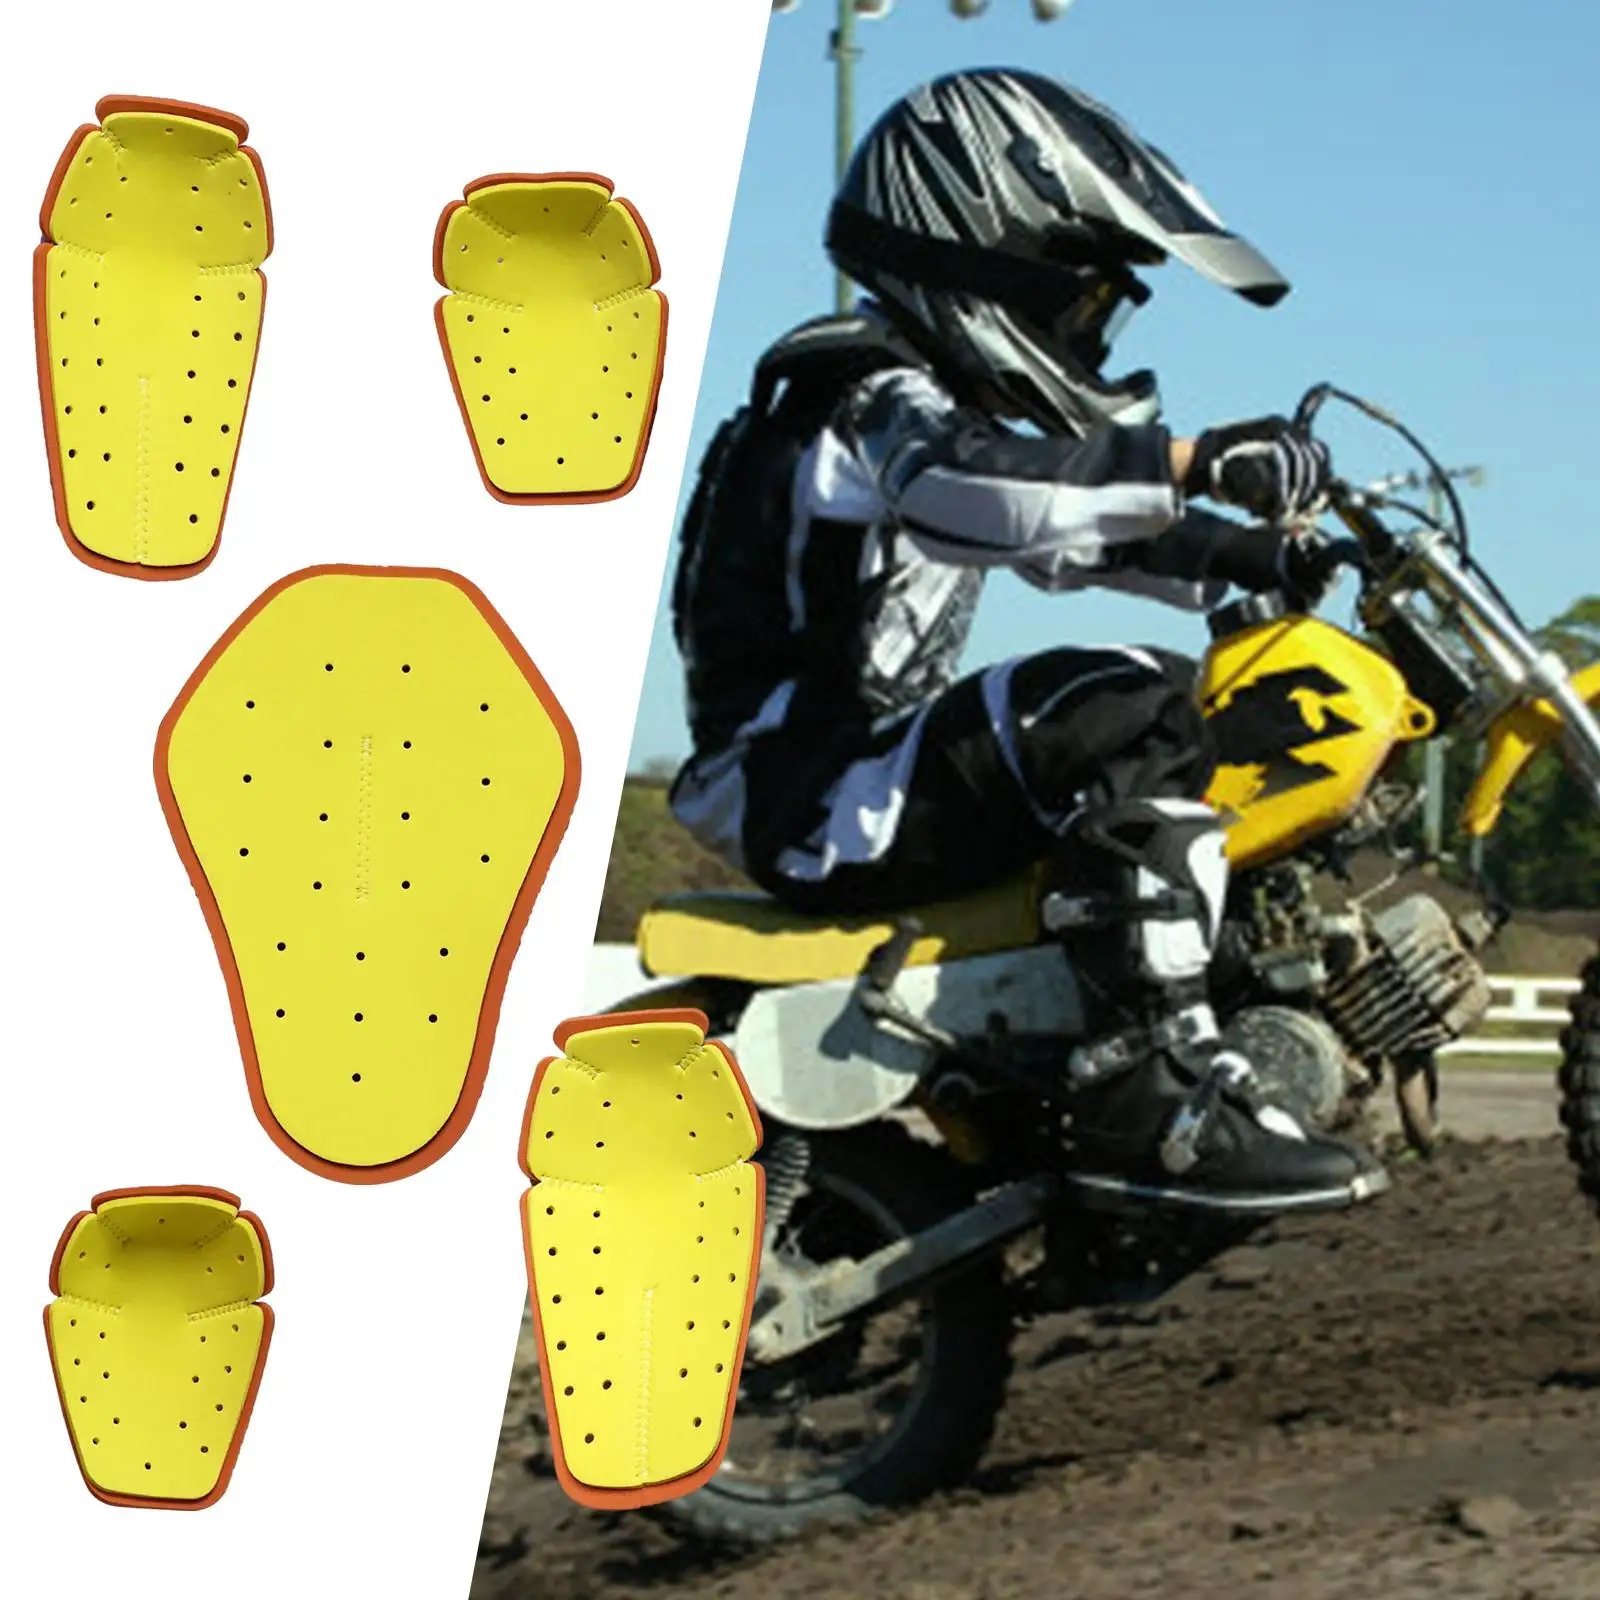 5x Motorbike Body Protective Gear Insert Protector Set EVA Motorcycle Accessories Motorbike Protection Pad for Biker